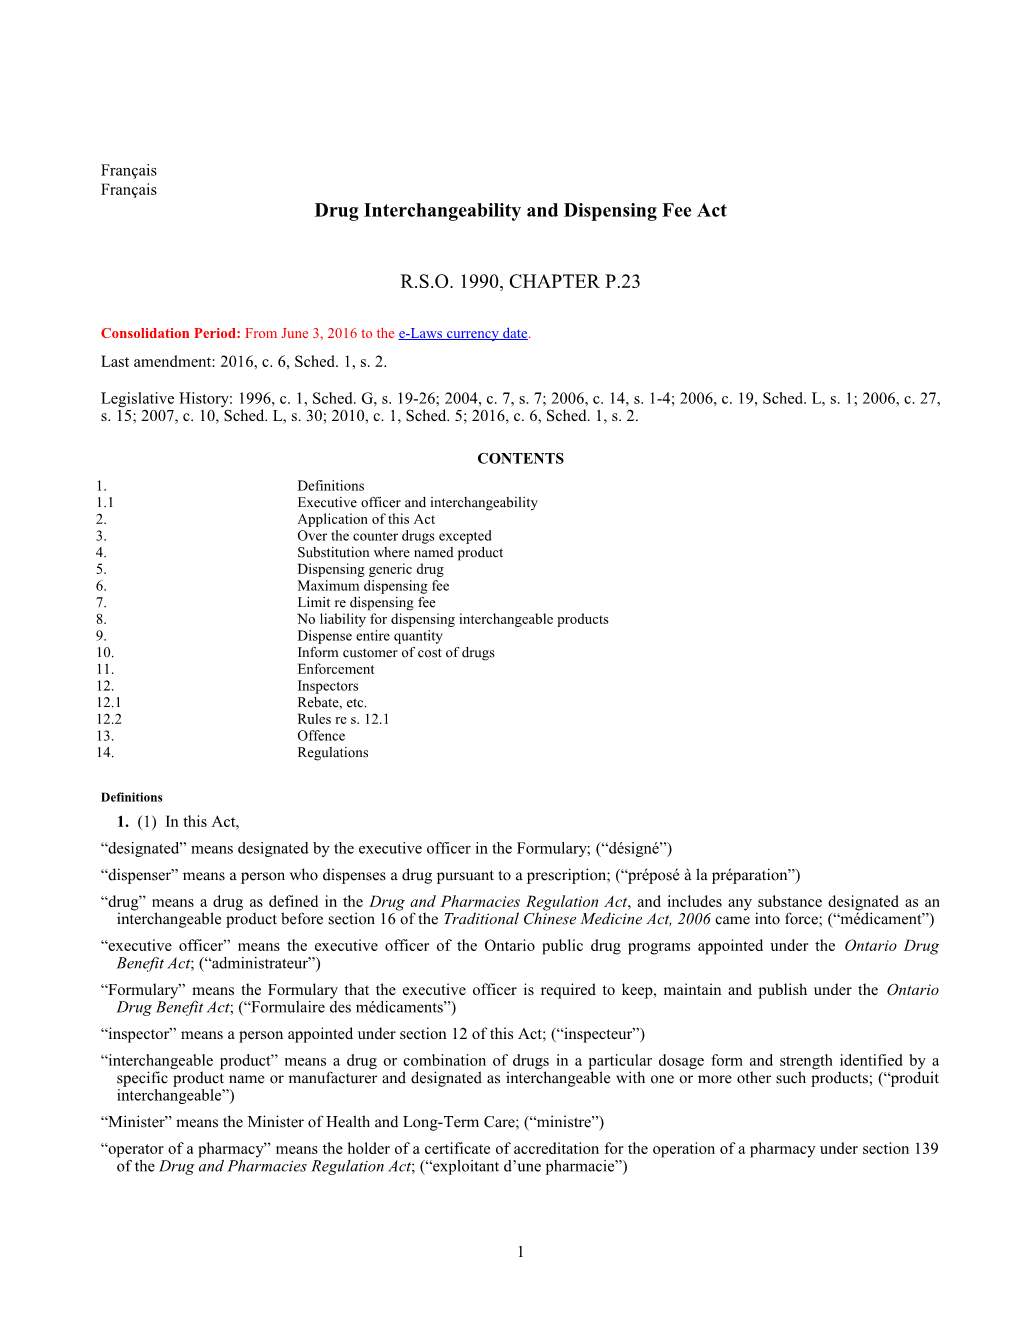 Drug Interchangeability and Dispensing Fee Act, R.S.O. 1990, C. P.23